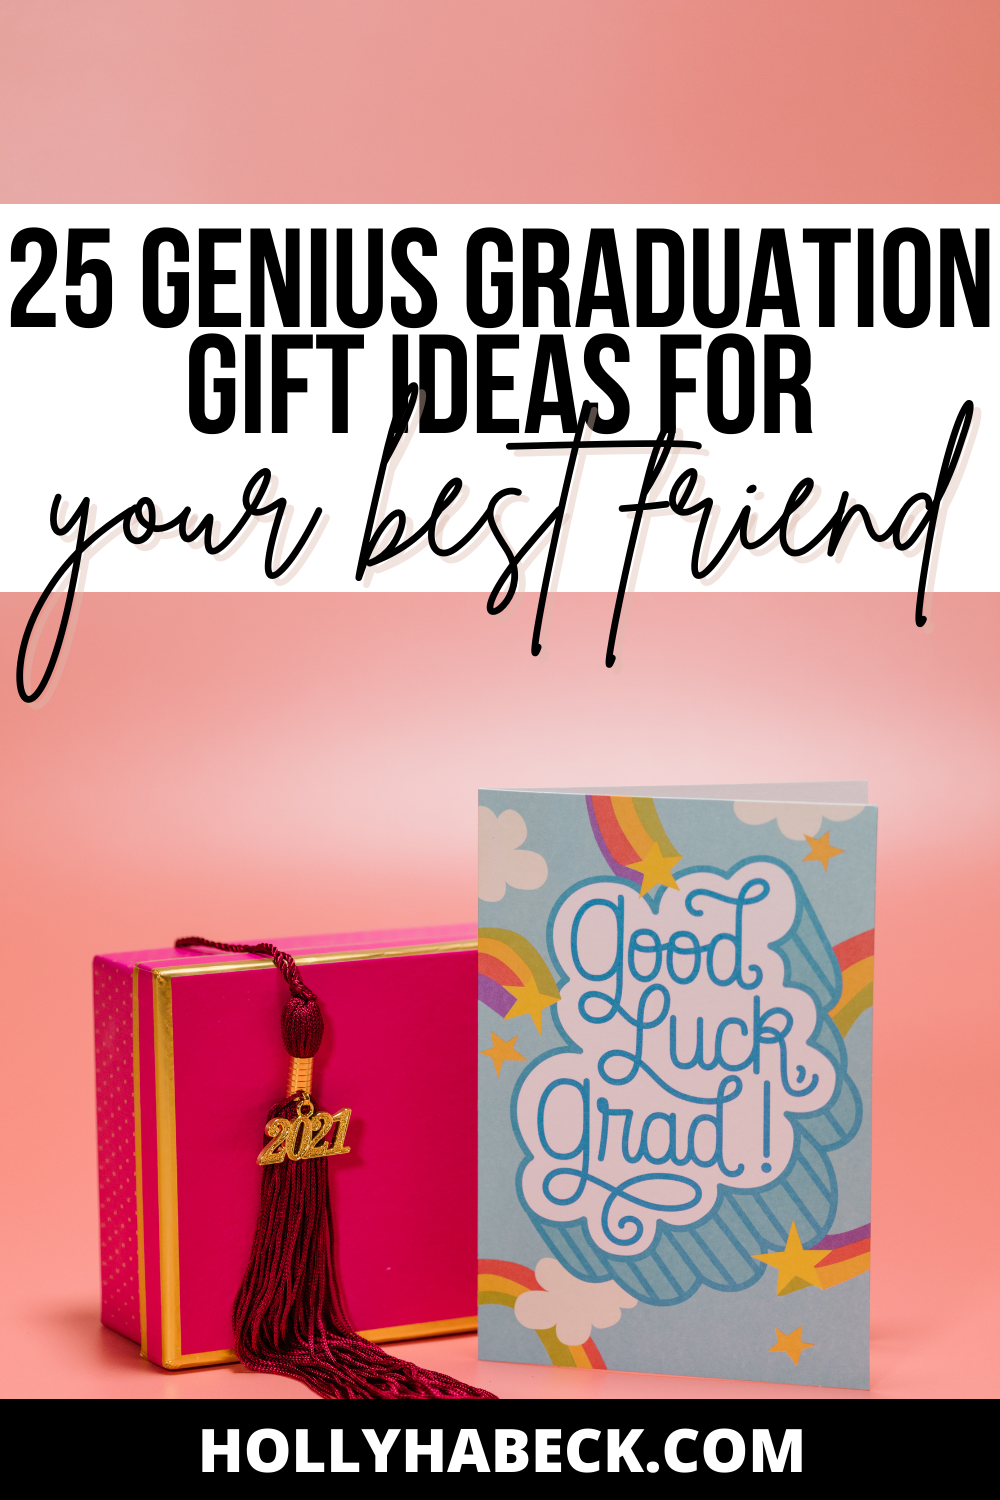 11 of the Best Meaningful Graduation Gift Ideas – Simply2moms